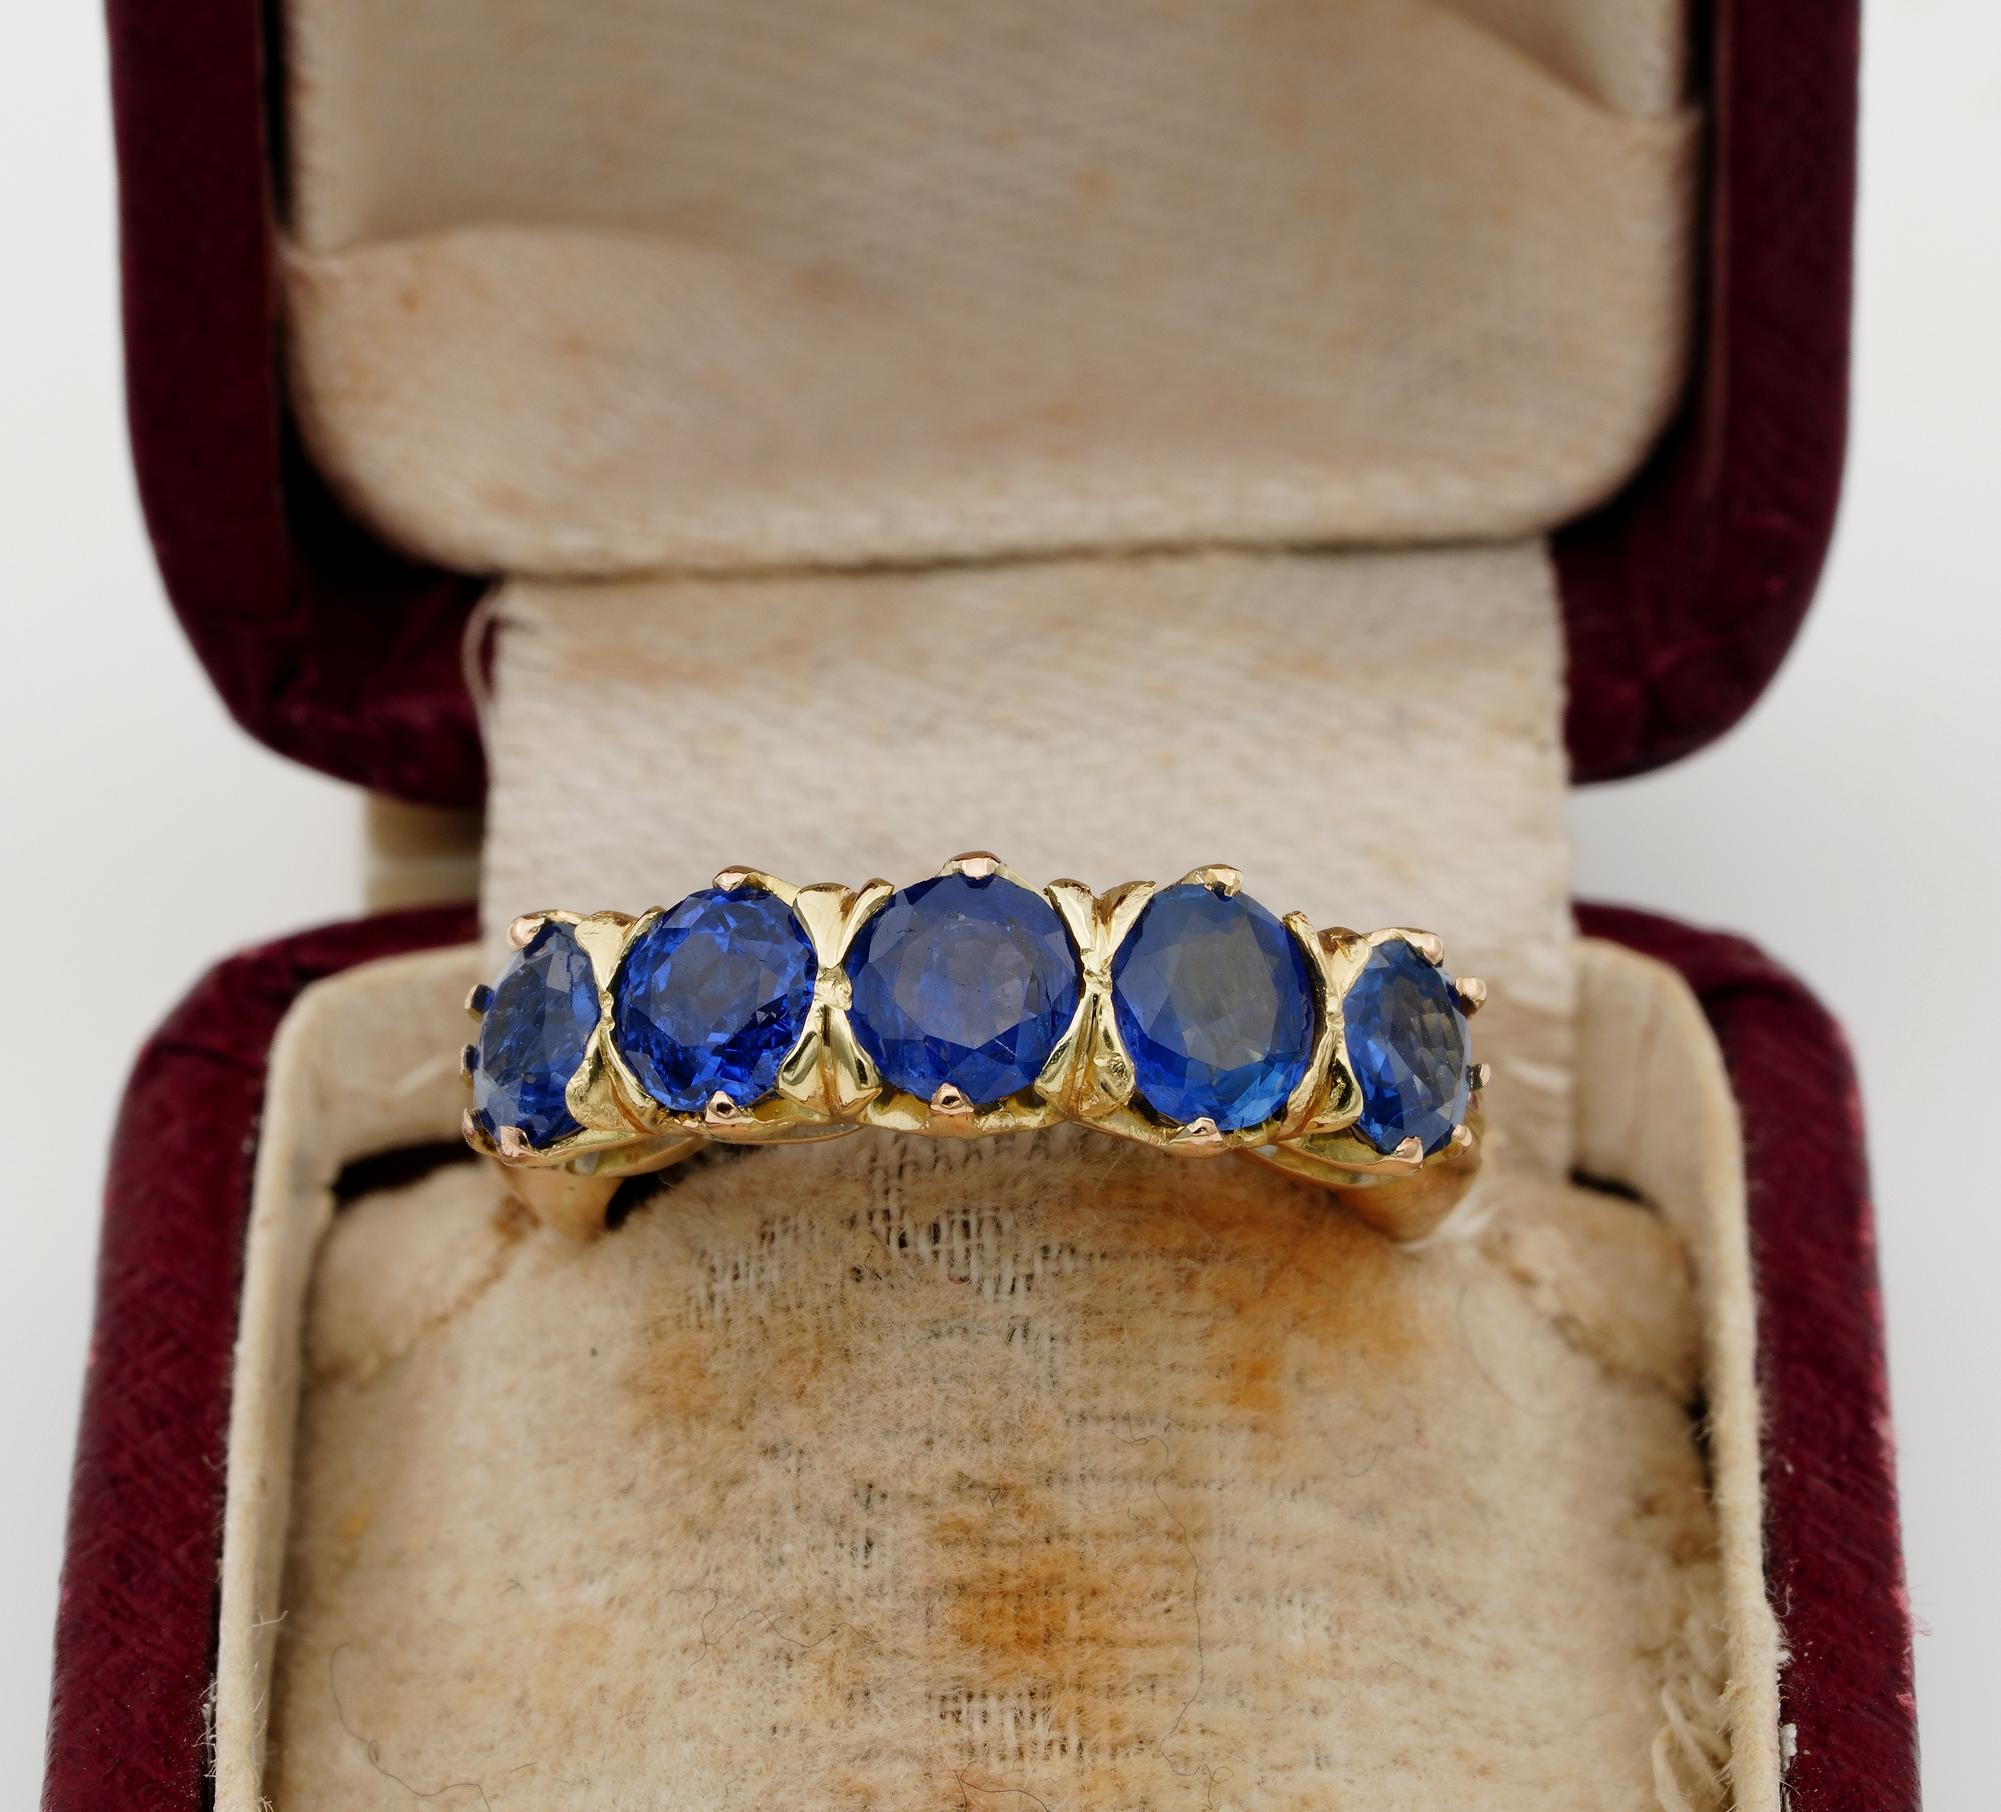 Superb 1930 ca five stone natural Sapphire ring
Hand crafted mounting beautifully rendered of solid 18 Kt gold
designed with a raised fret work lifting up the stone’s array for more effect
Set with an array of five round faceted cut Natural